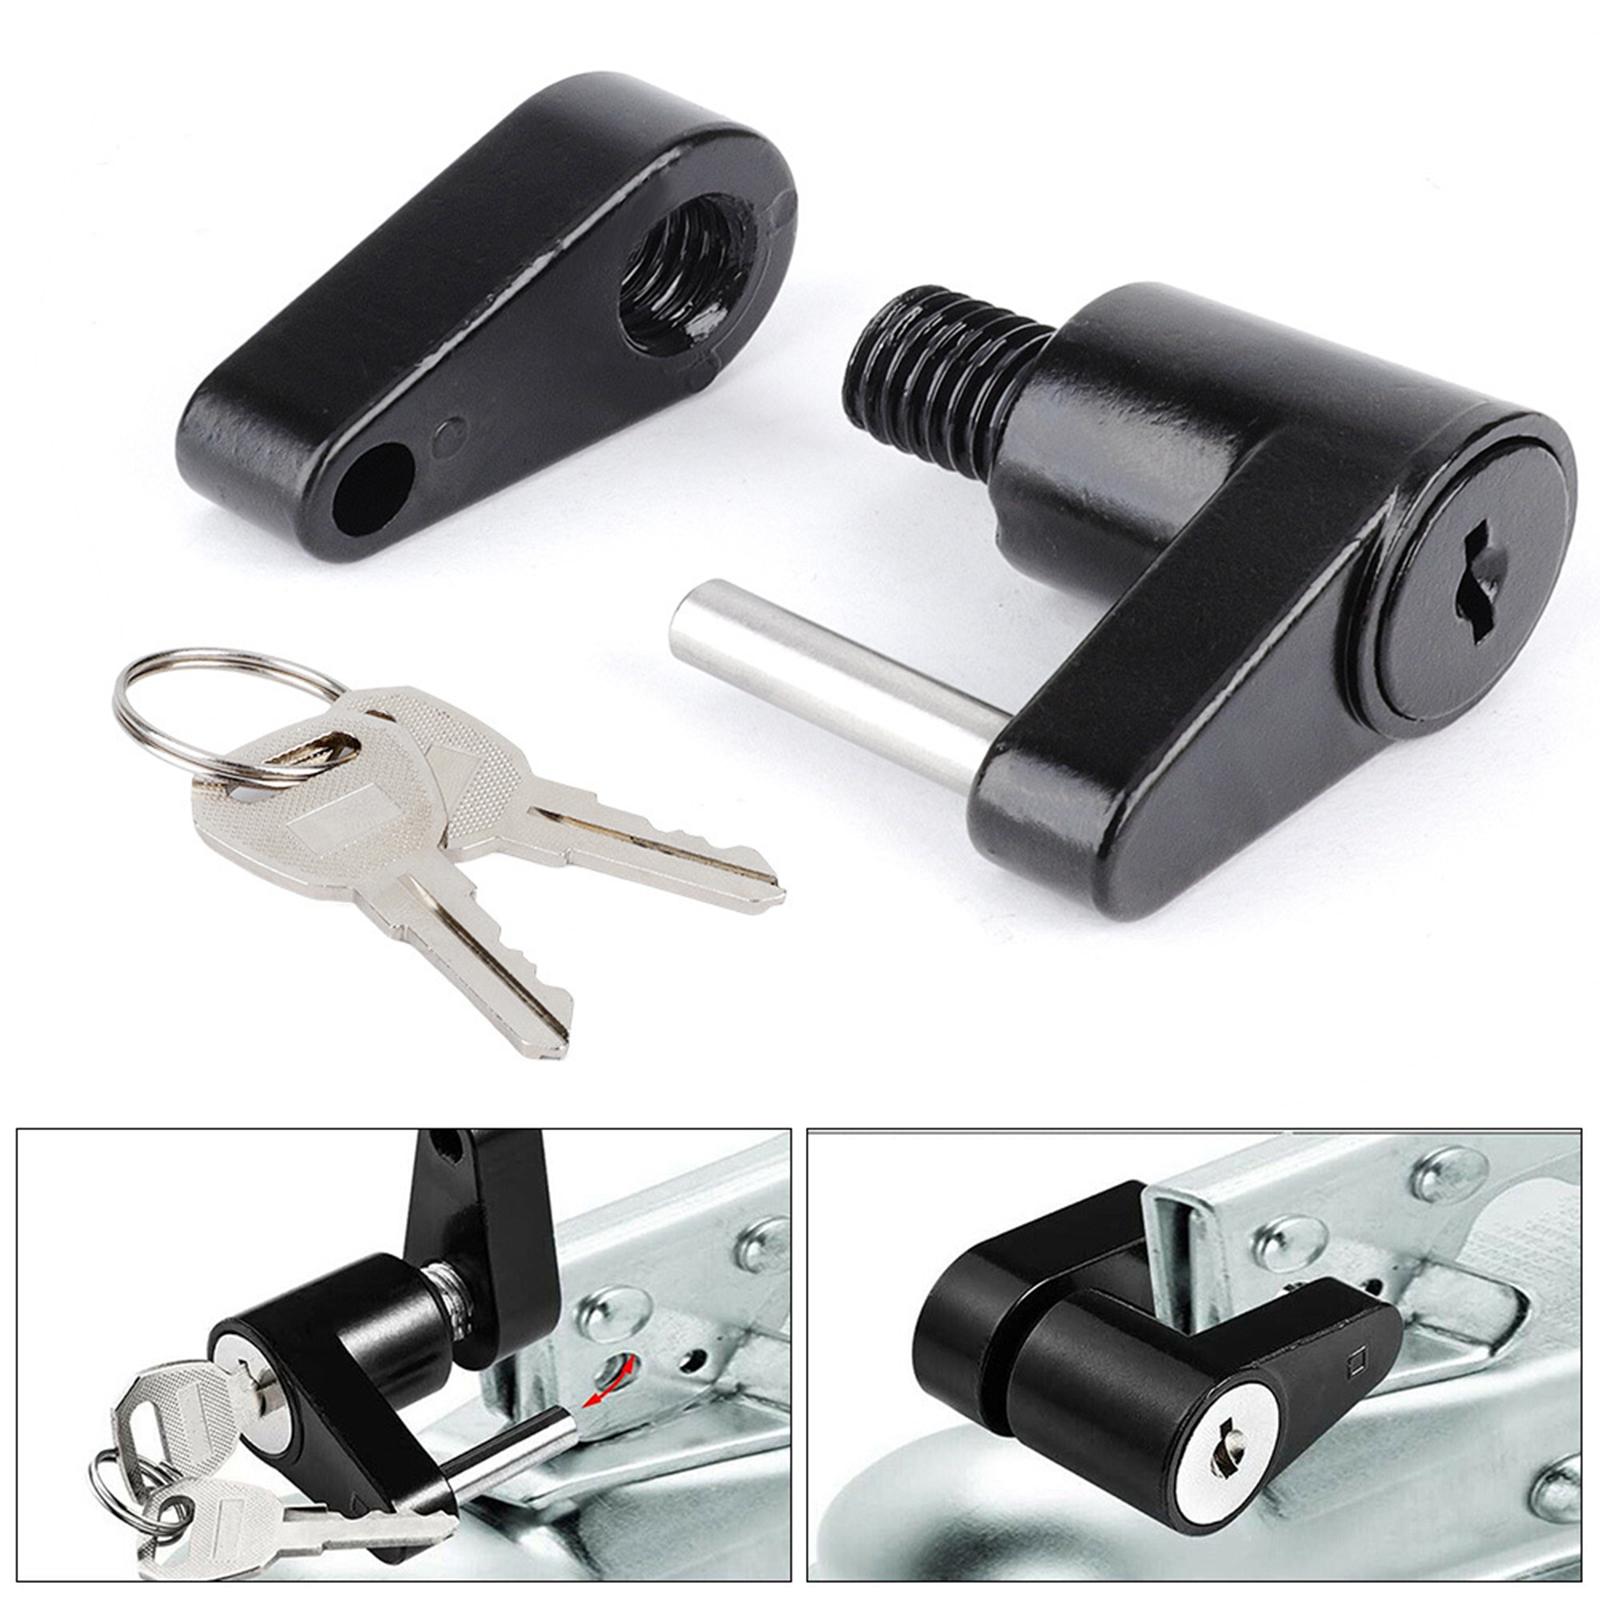 Trailer Coupler Lock with 2 Keys for Construction Vehicles Campers